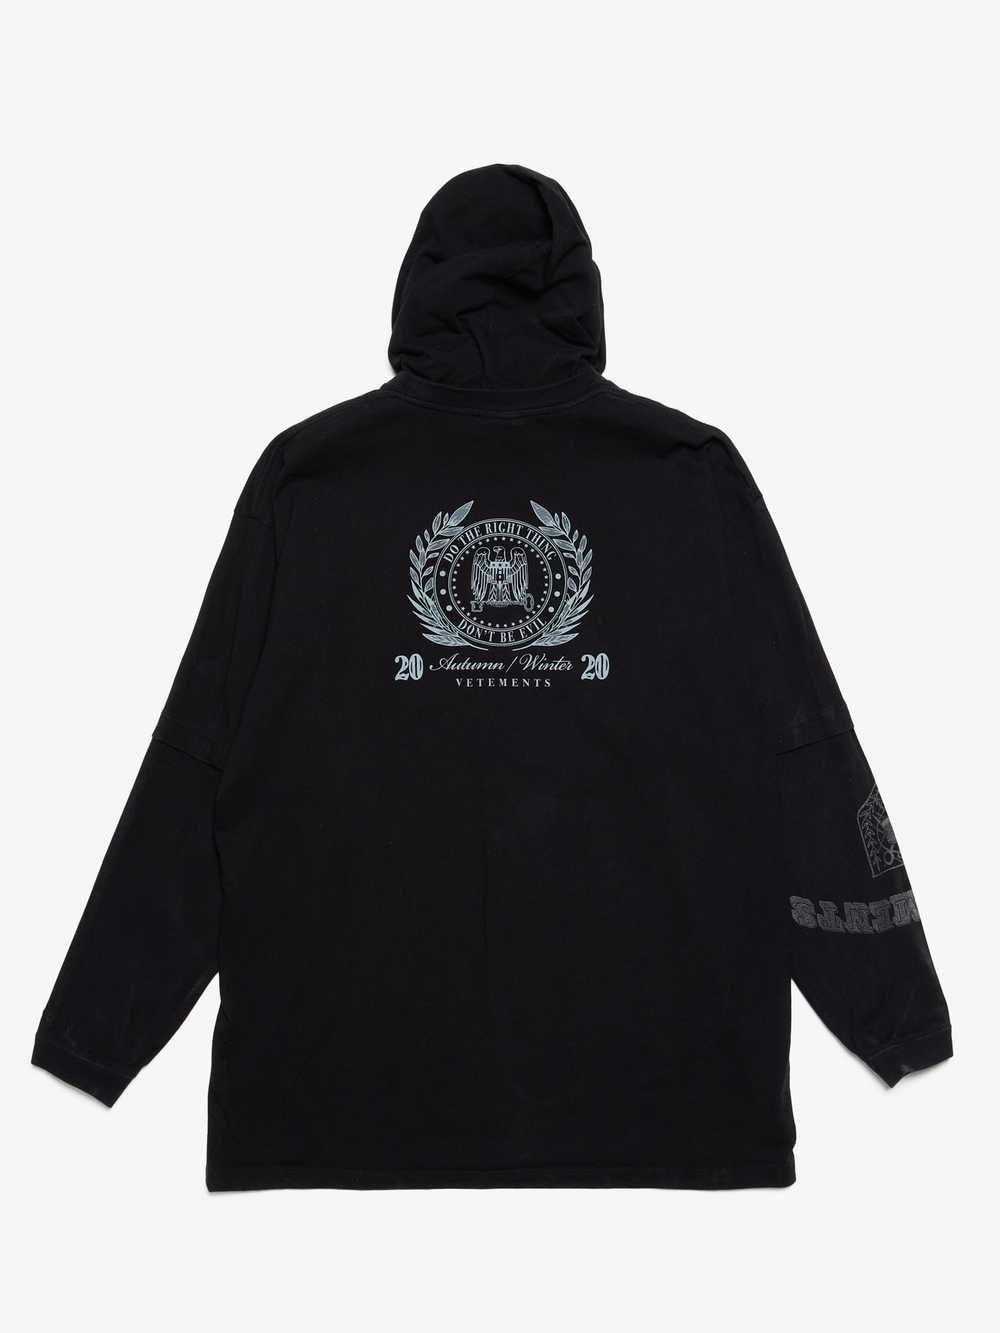 Vetements AW20 The President Black Jersey Hoodie - image 2